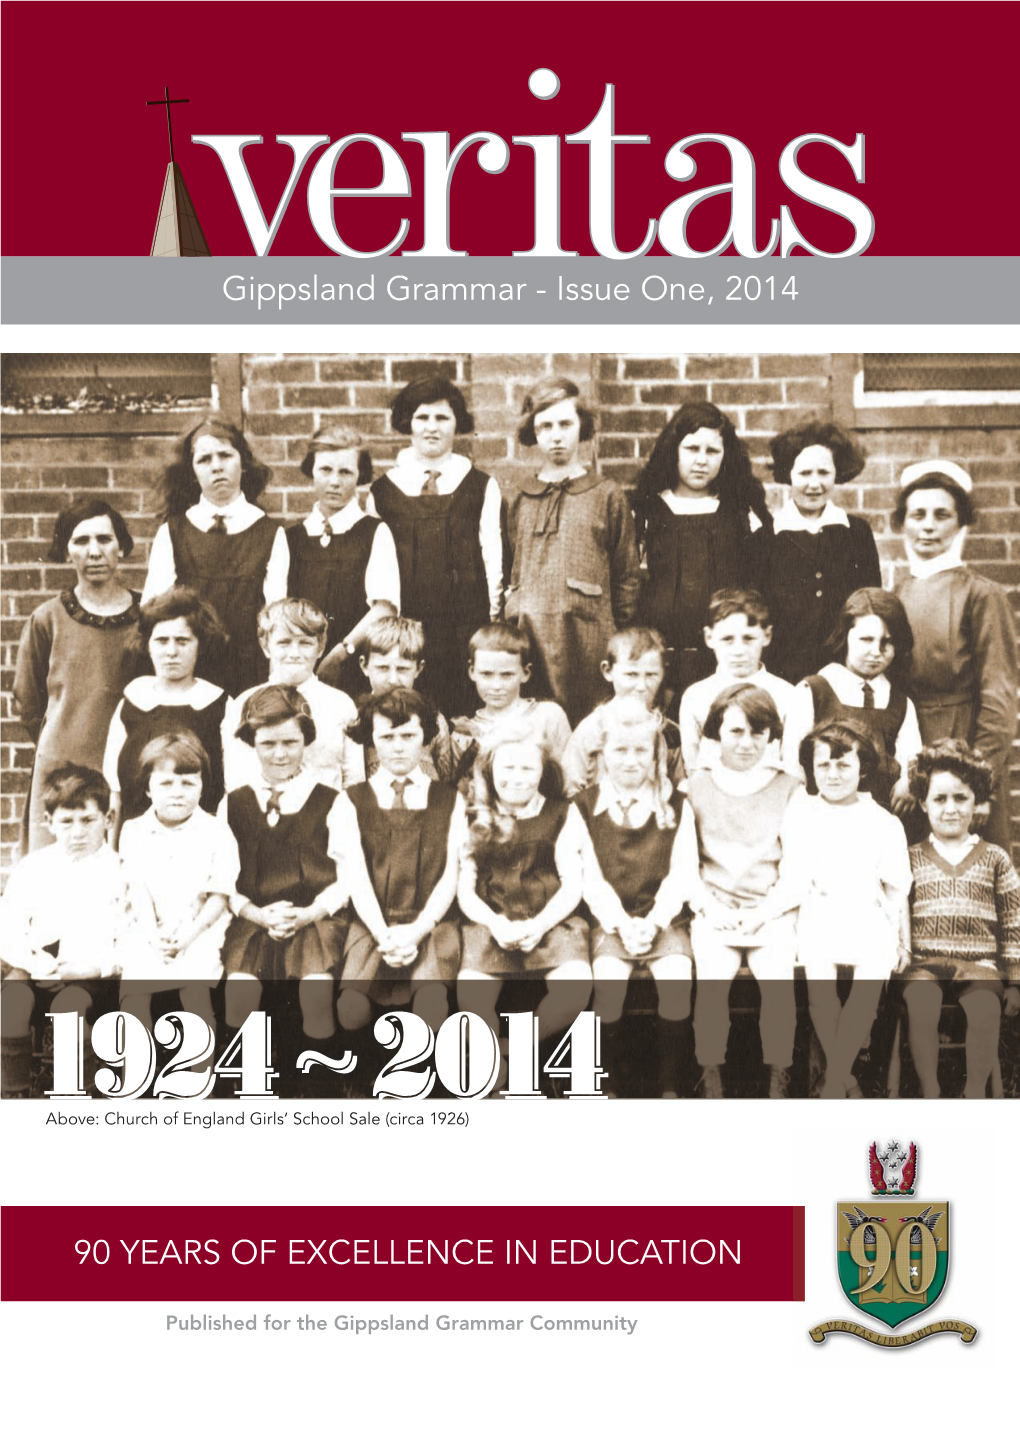 Issue One, 2014 90 YEARS of EXCELLENCE IN